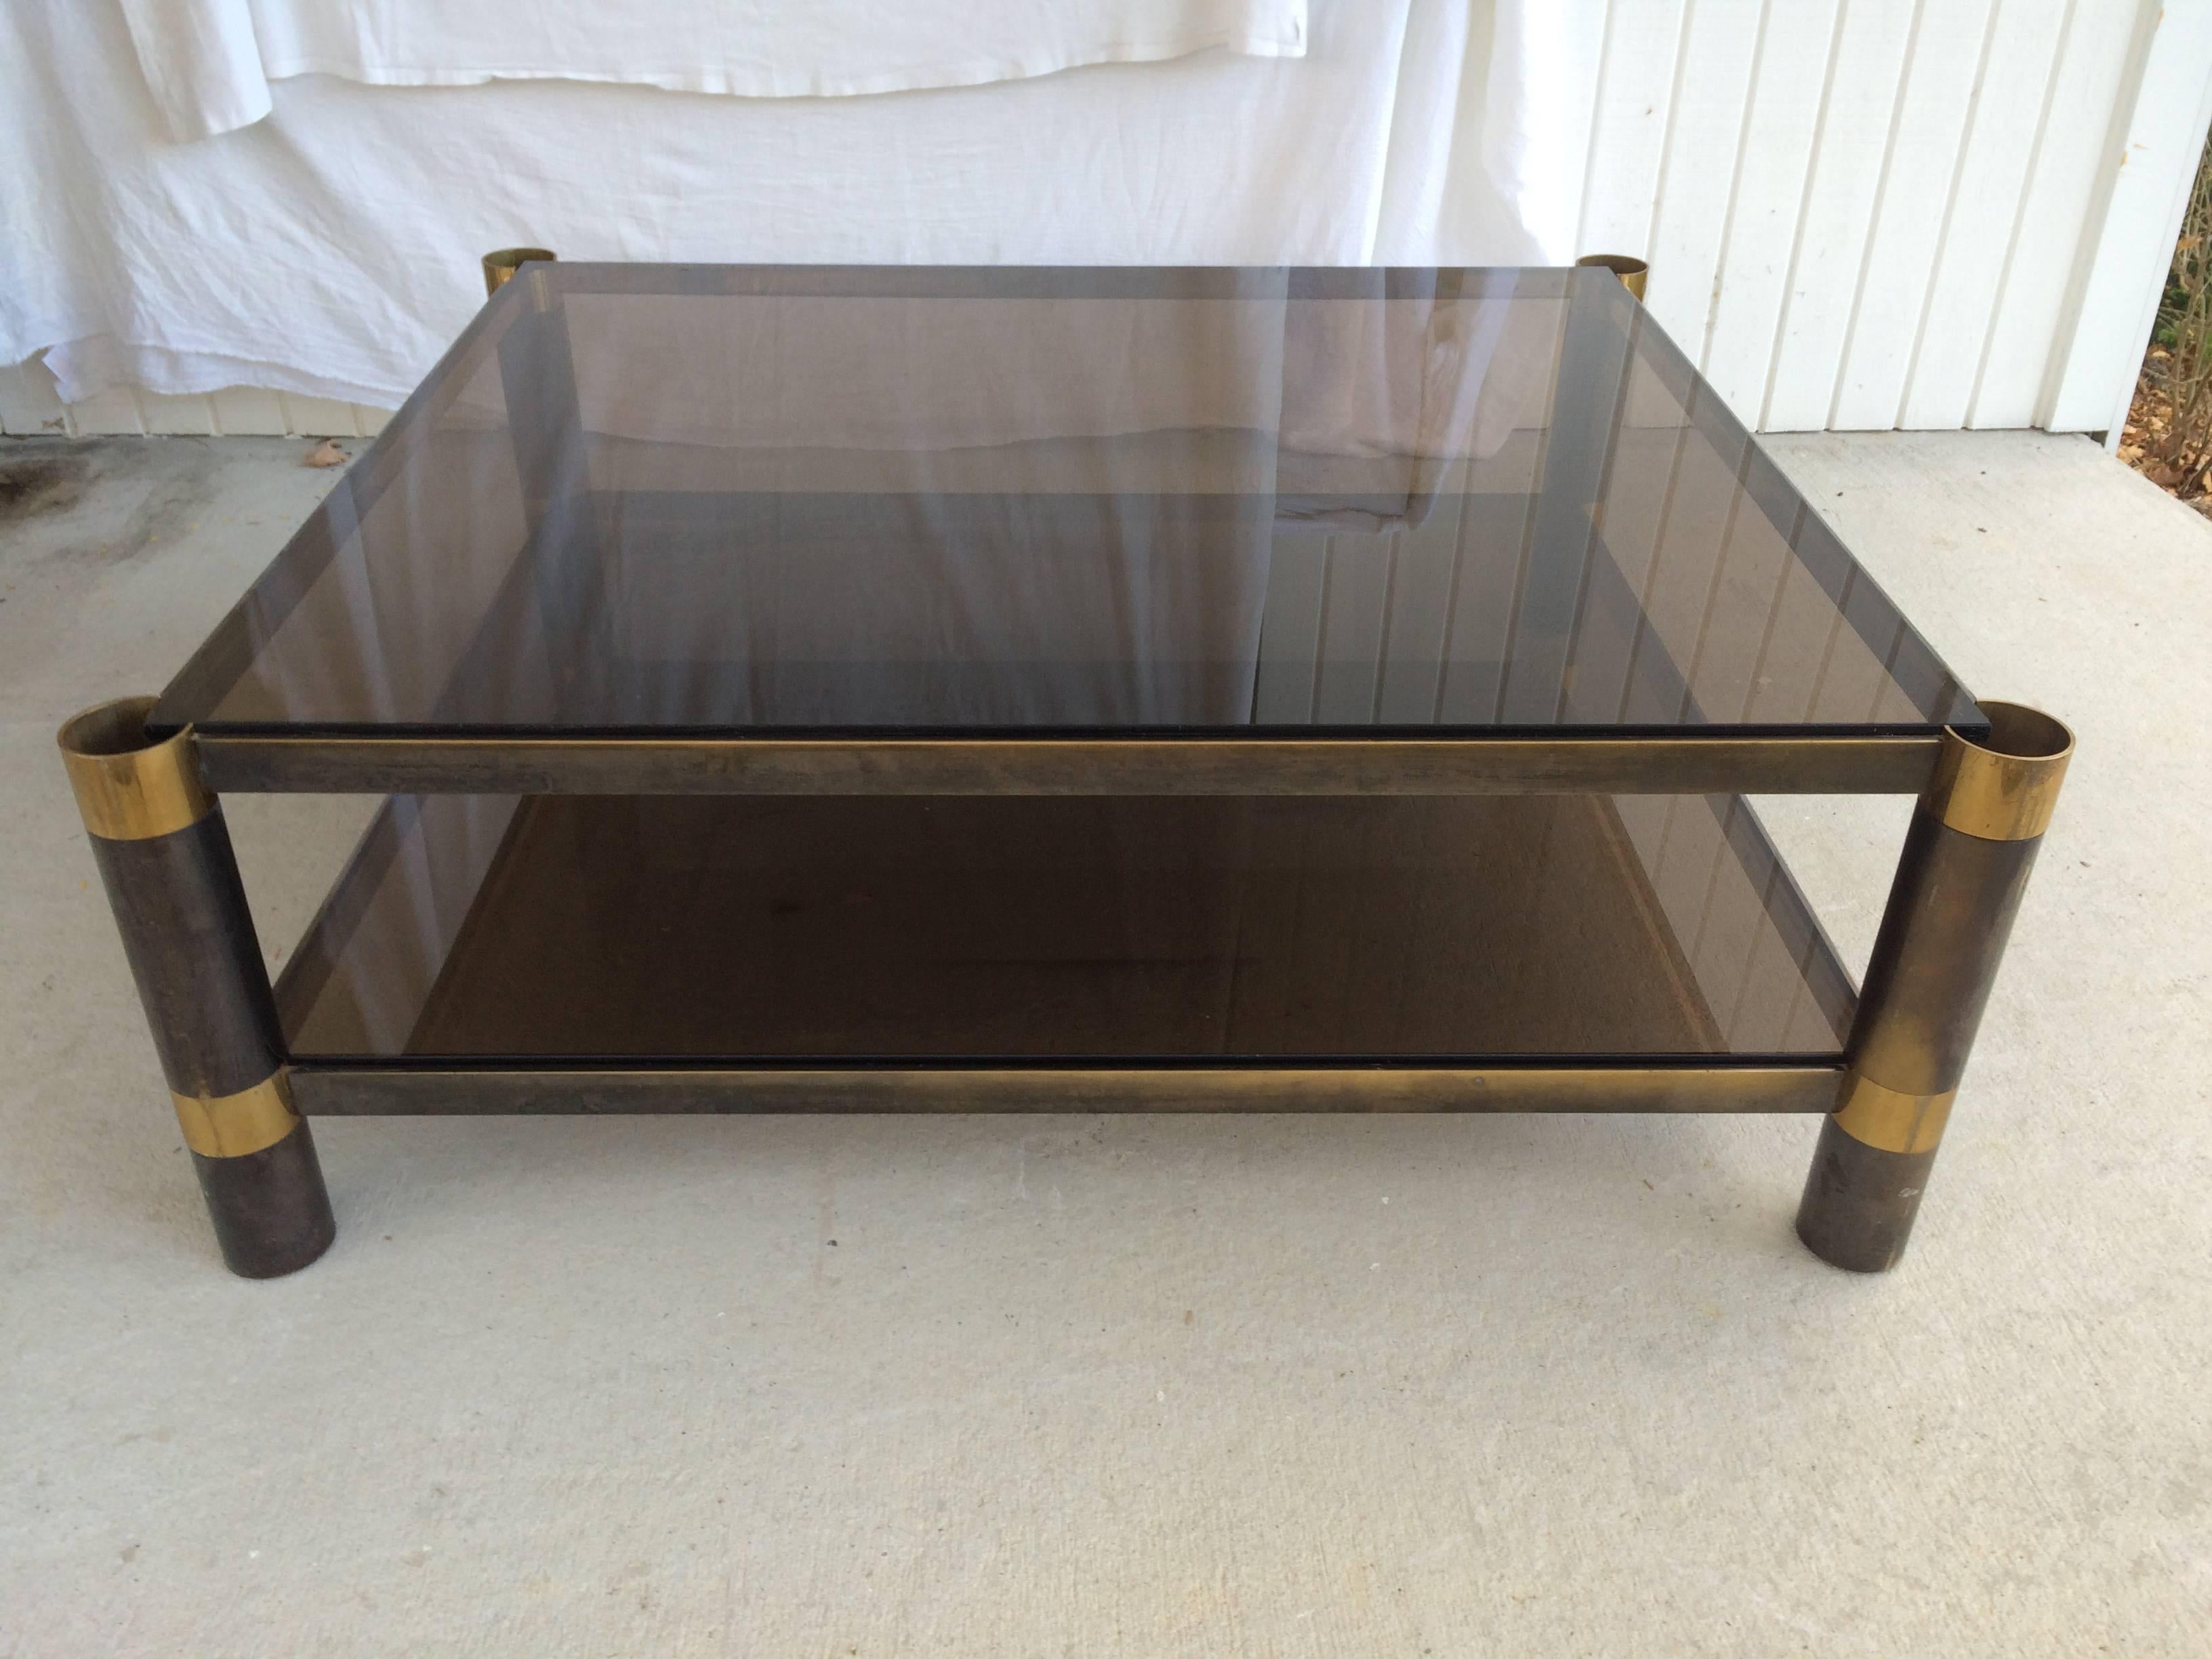 Signed Karl Springer two-tiered smoked glass coffee table. This large nickel and brass coffee table has cylindrical legs and will make a sexy addition to any room. We have had new brass caps for the leg tops fabricated.
Final Markdown. This item is